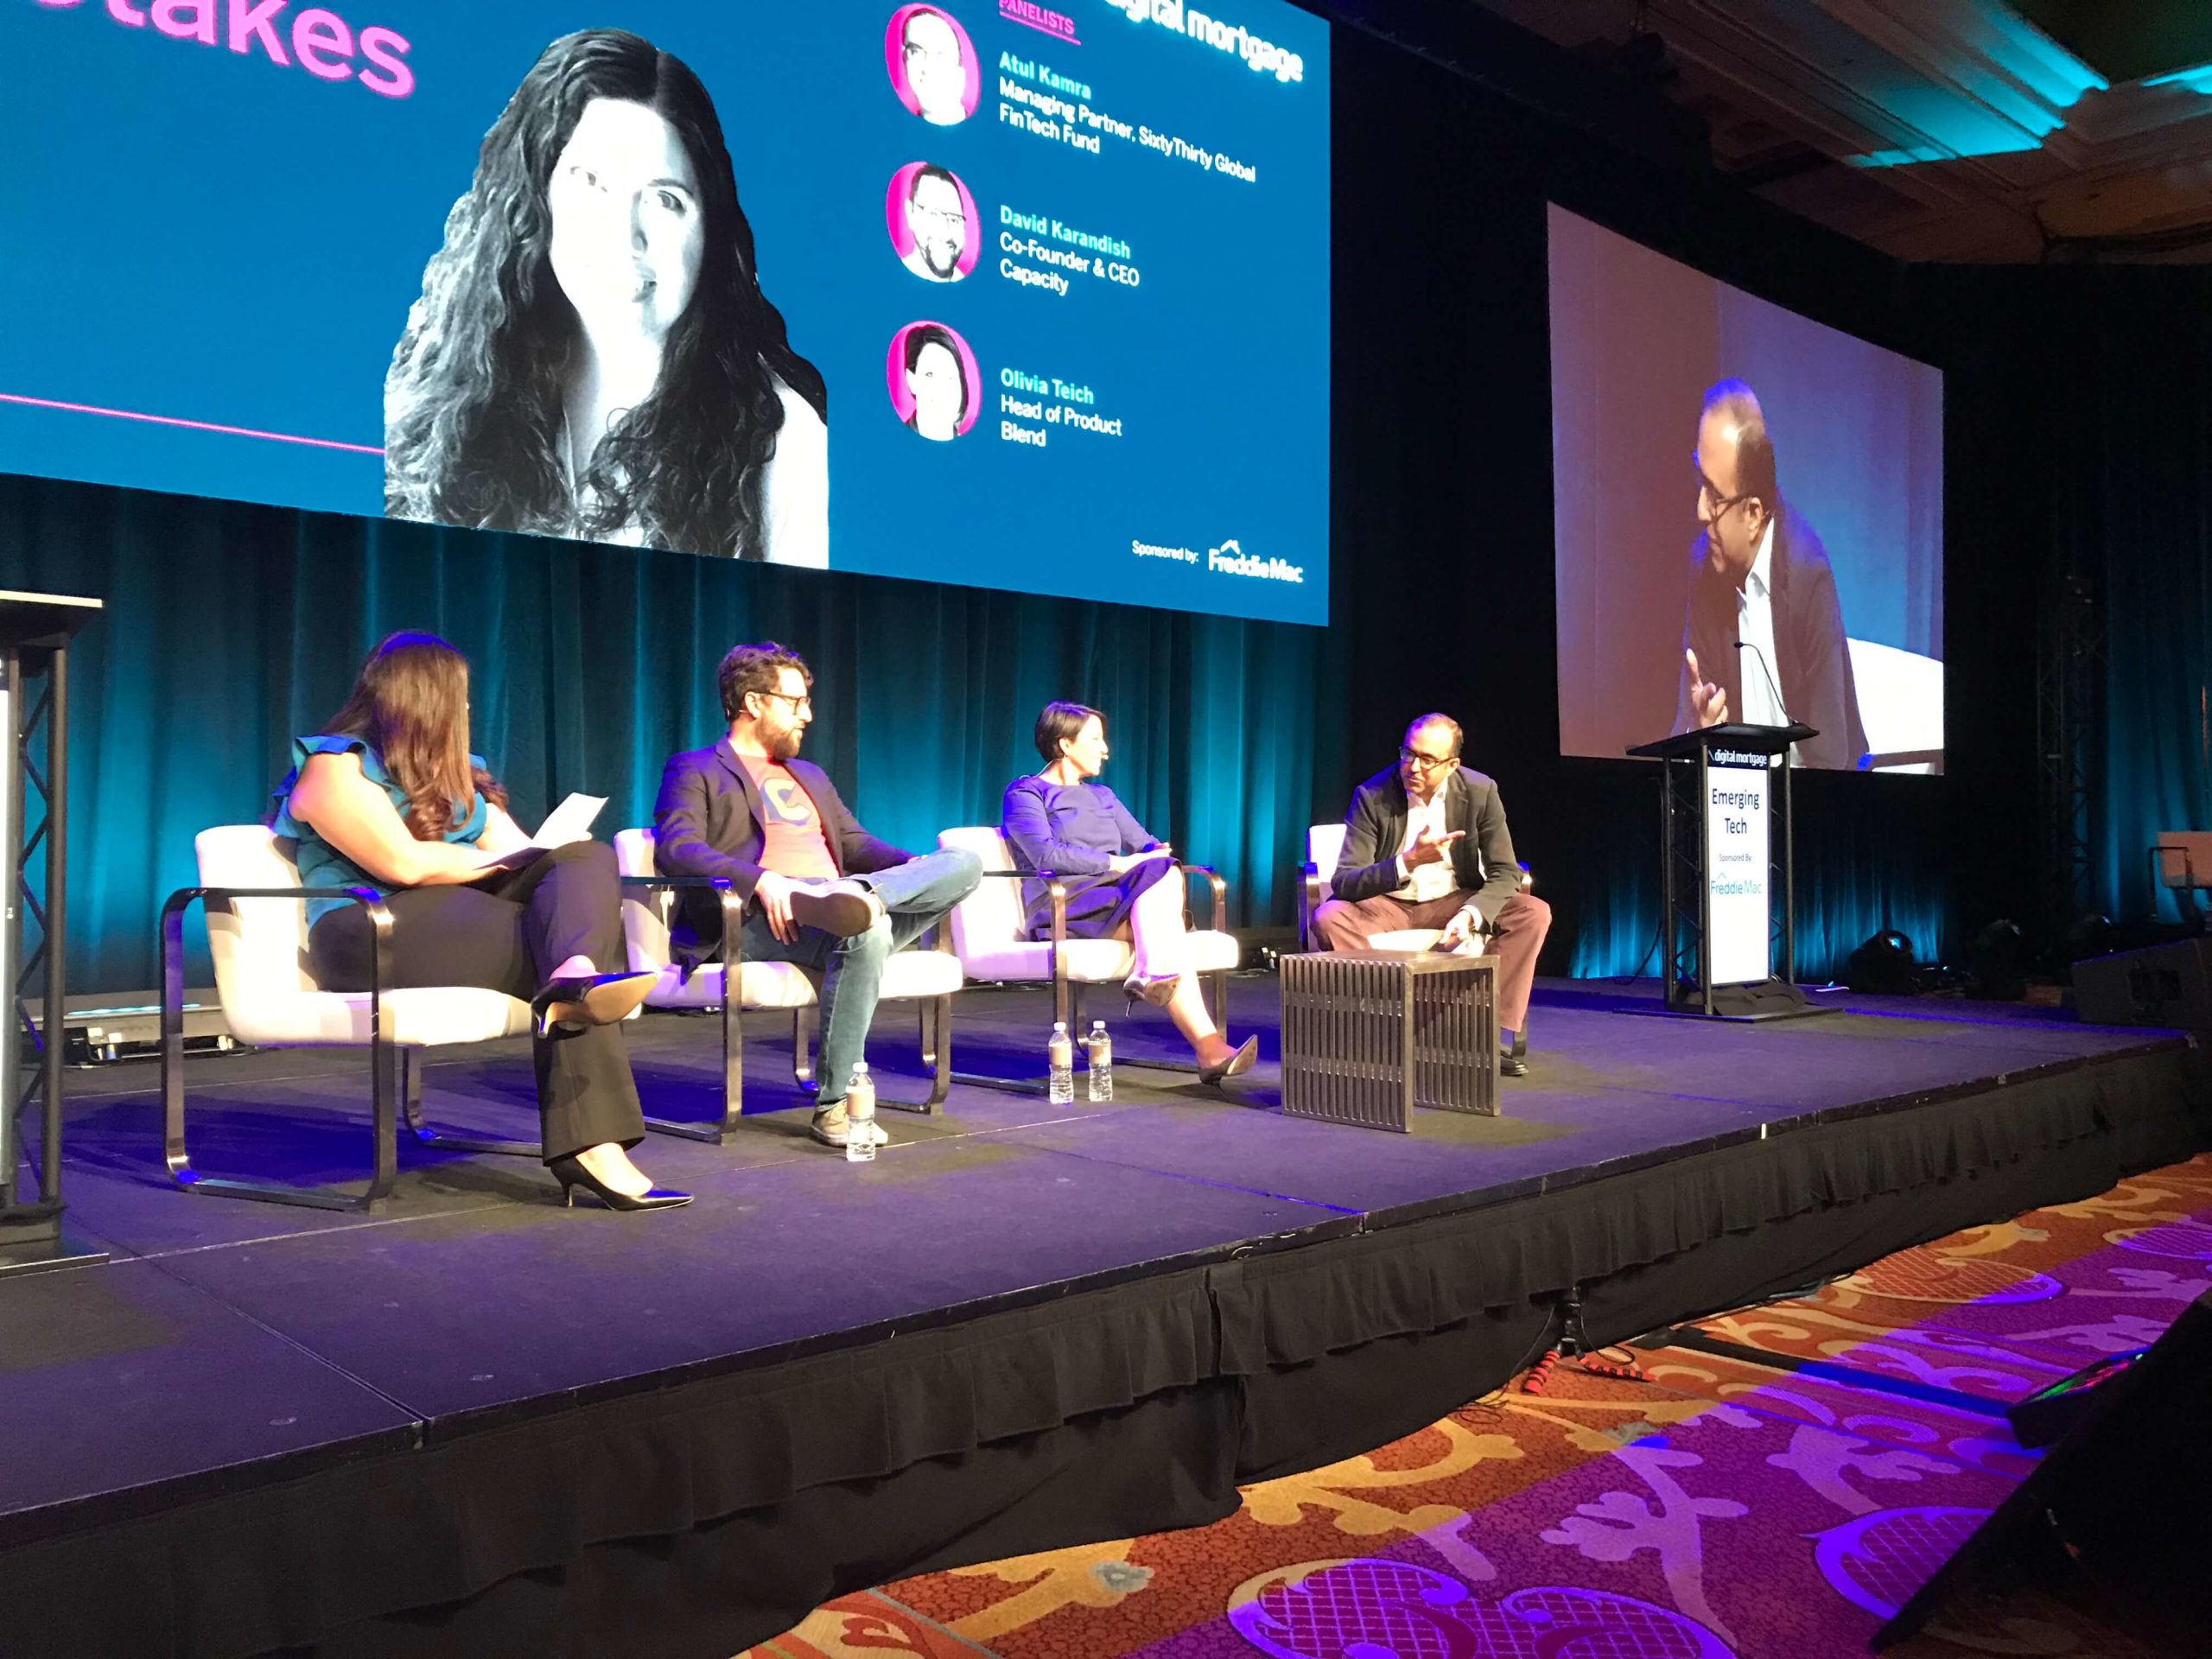 Capacity's CEO and Cofounder, David Karandish discusses technology in the mortgage industry during Digital Mortgage 2019 Conference.